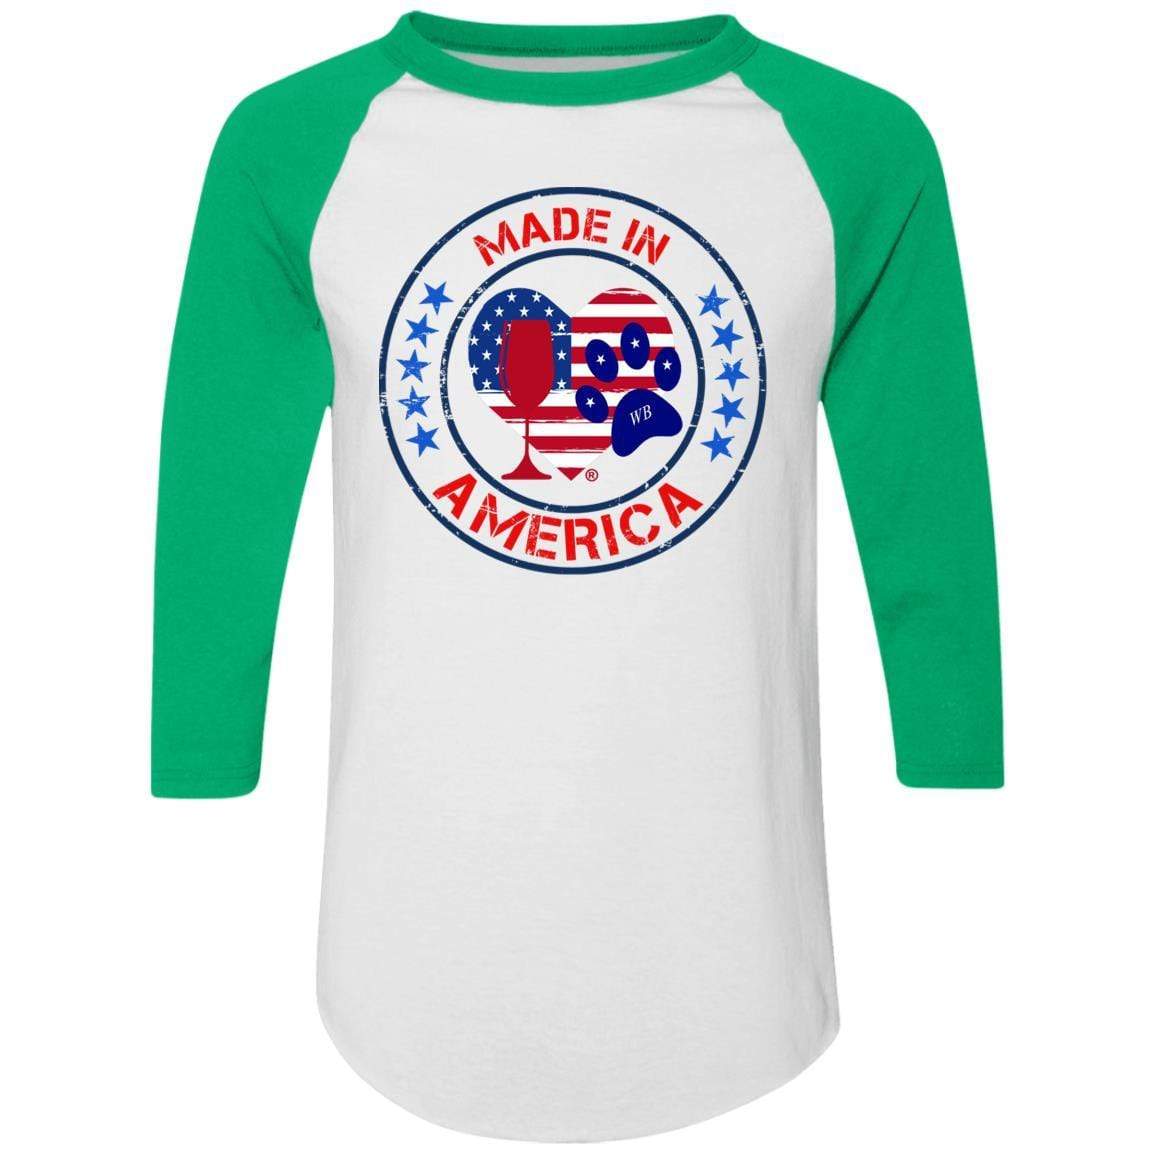 T-Shirts White/Kelly / S Winey Bitches Co "Made In America" Colorblock Raglan Jersey WineyBitchesCo